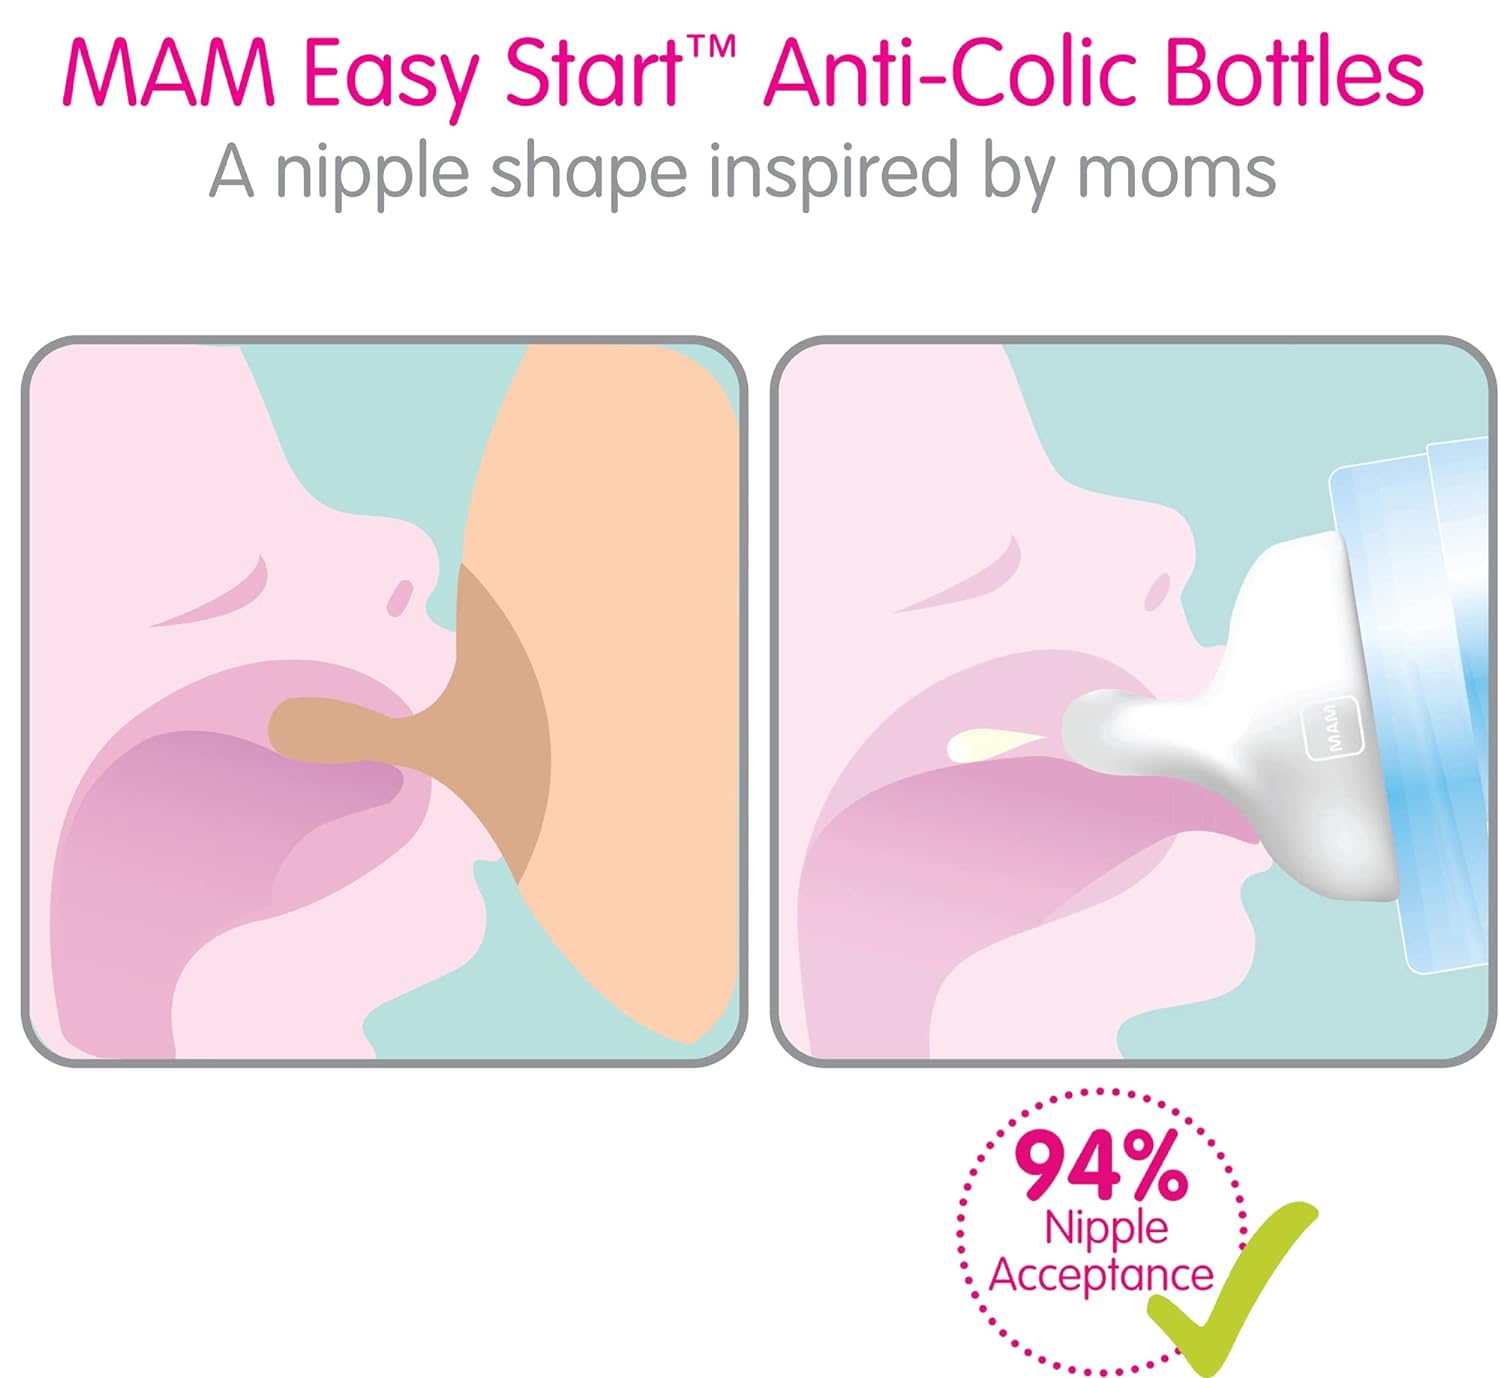 MAM Baby’s First Gift Set, 0+ Months, 5oz and 9oz Anti-Colic Bottles with Self-Sterilization, SkinSoft Silicone Nipples and Pacifiers, Dishwasher Safe Formula Dispenser and Bottle Brush, Unisex